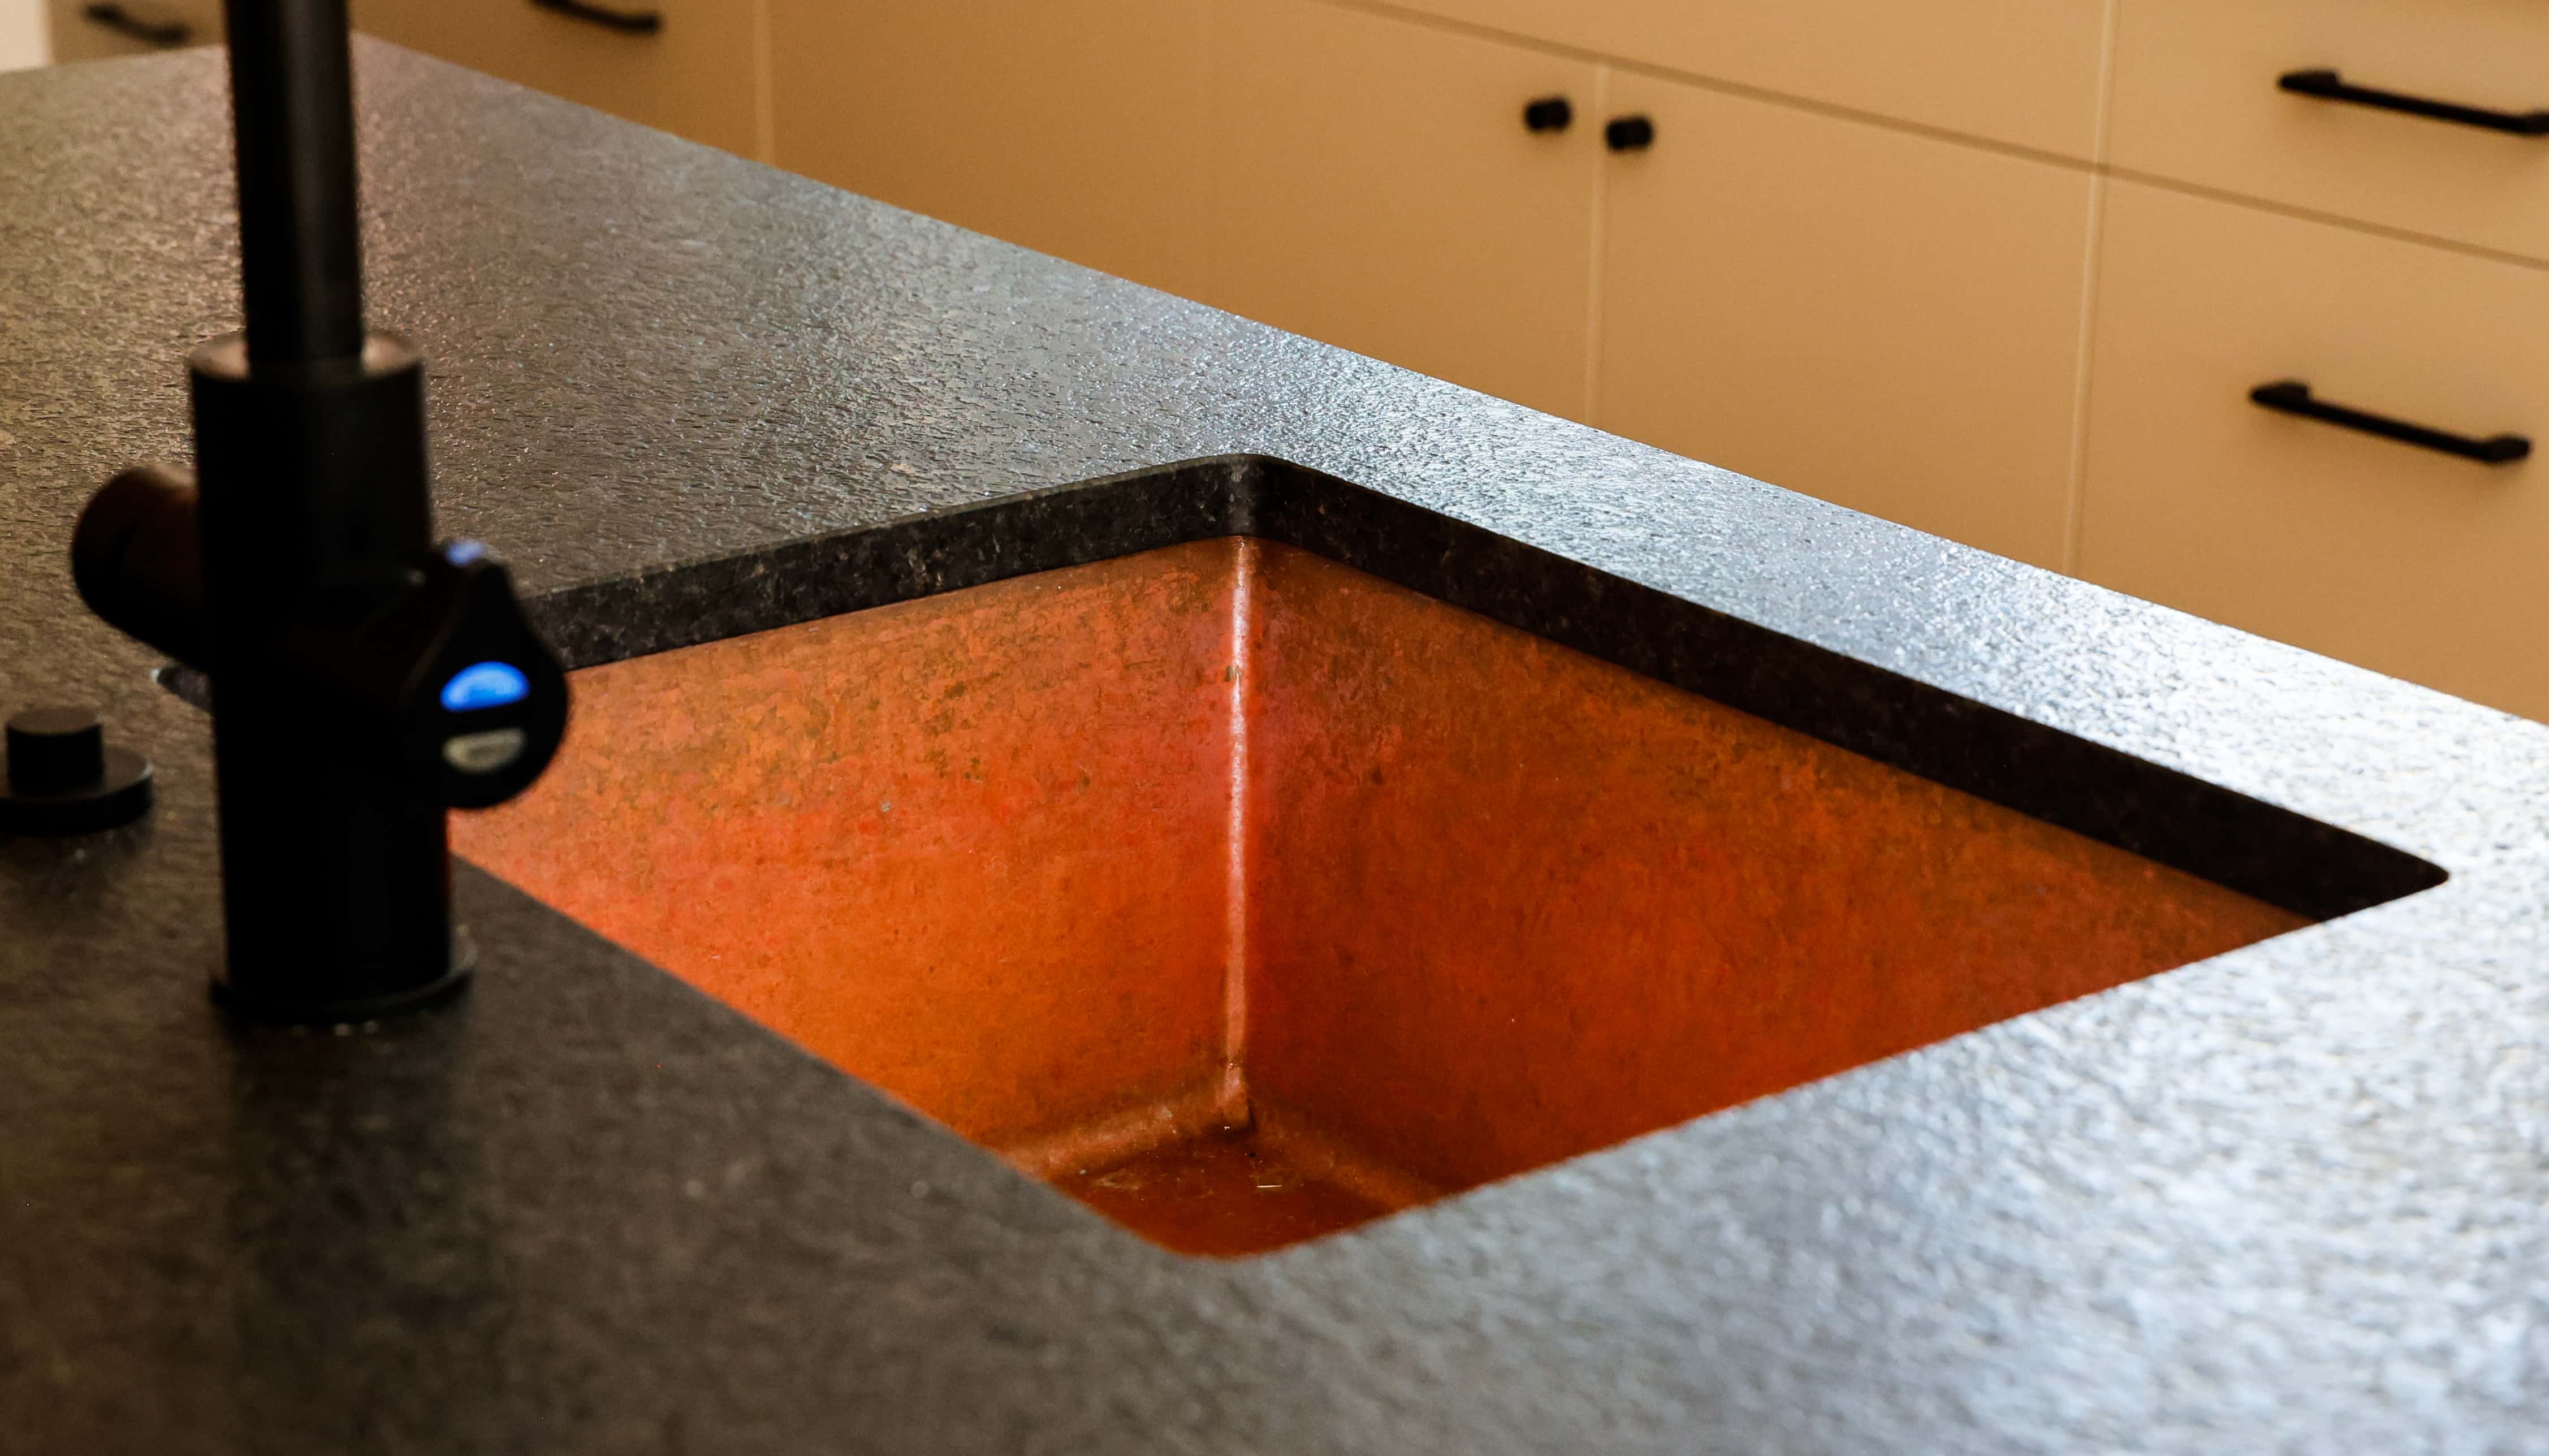 CopperSmith Bar SB Weathered Copper Sink in a contemporary kitchen with Black countertops and white cabinets